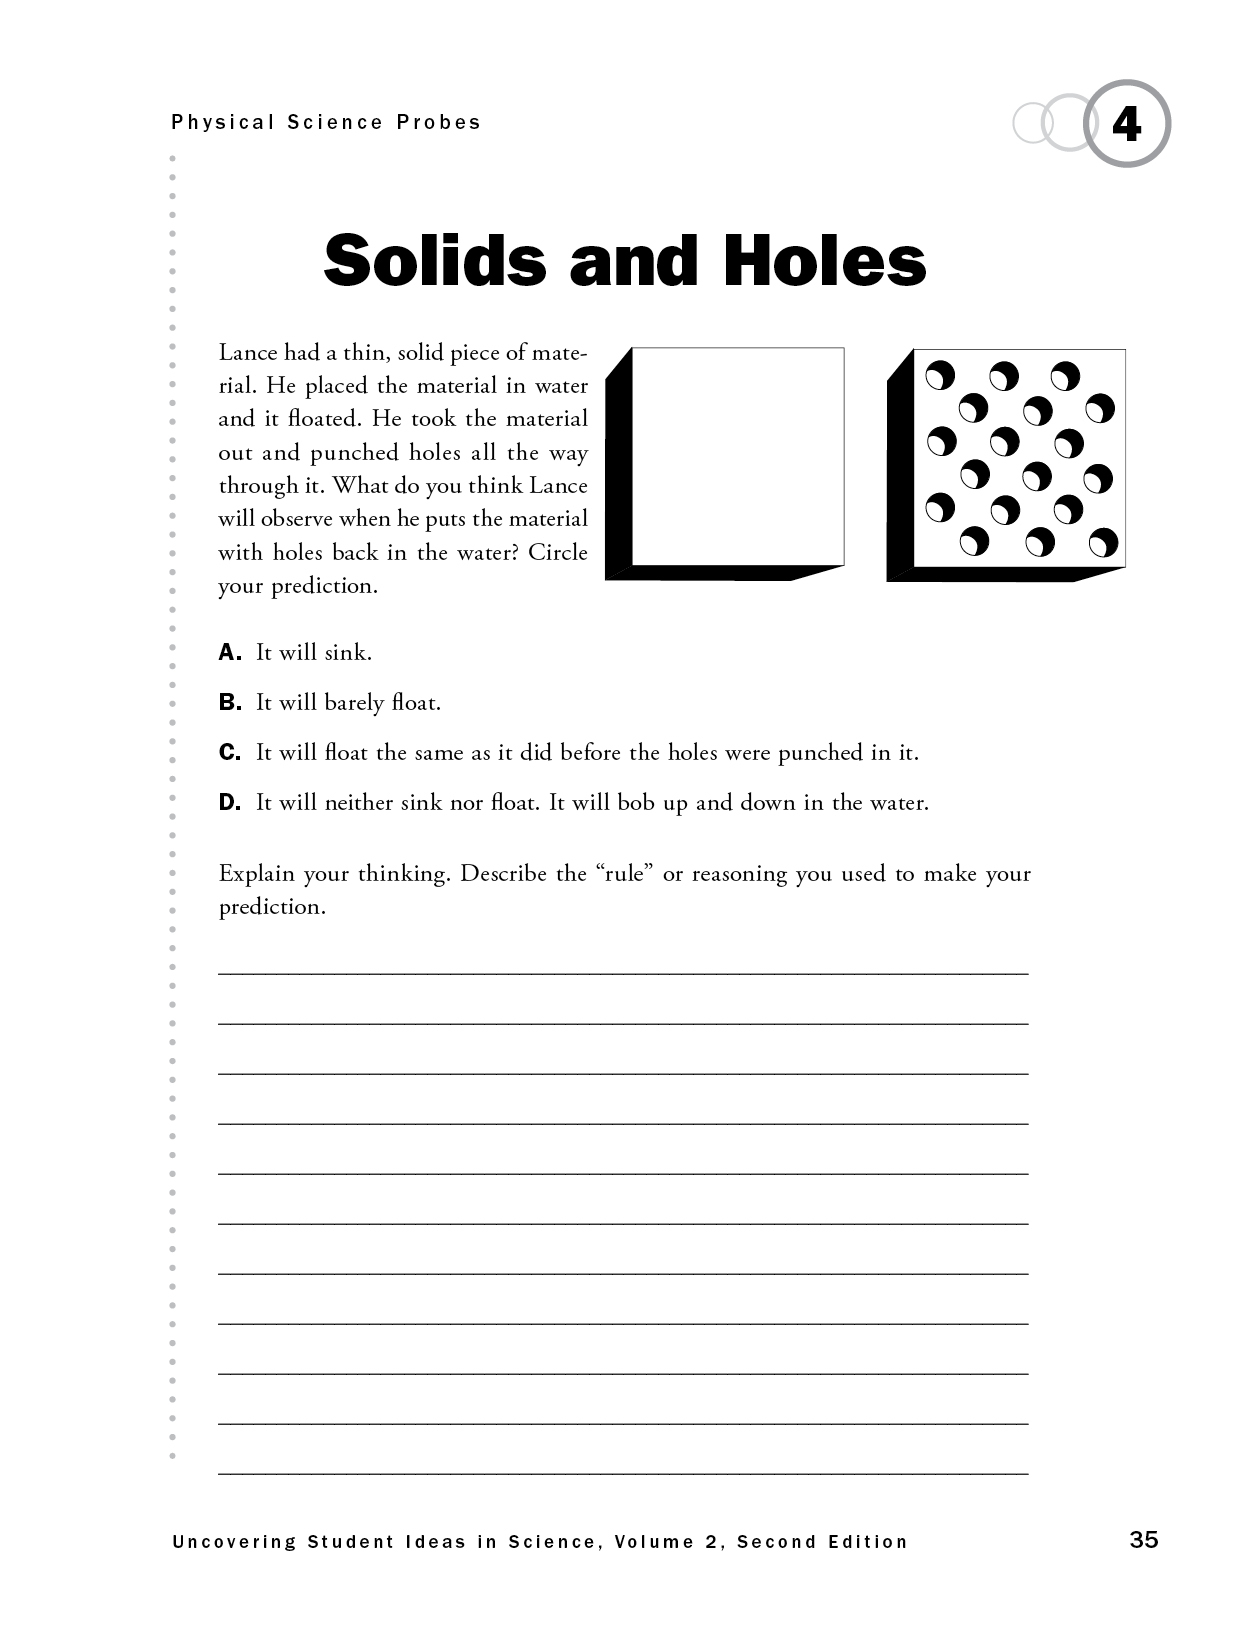 Solids and Holes